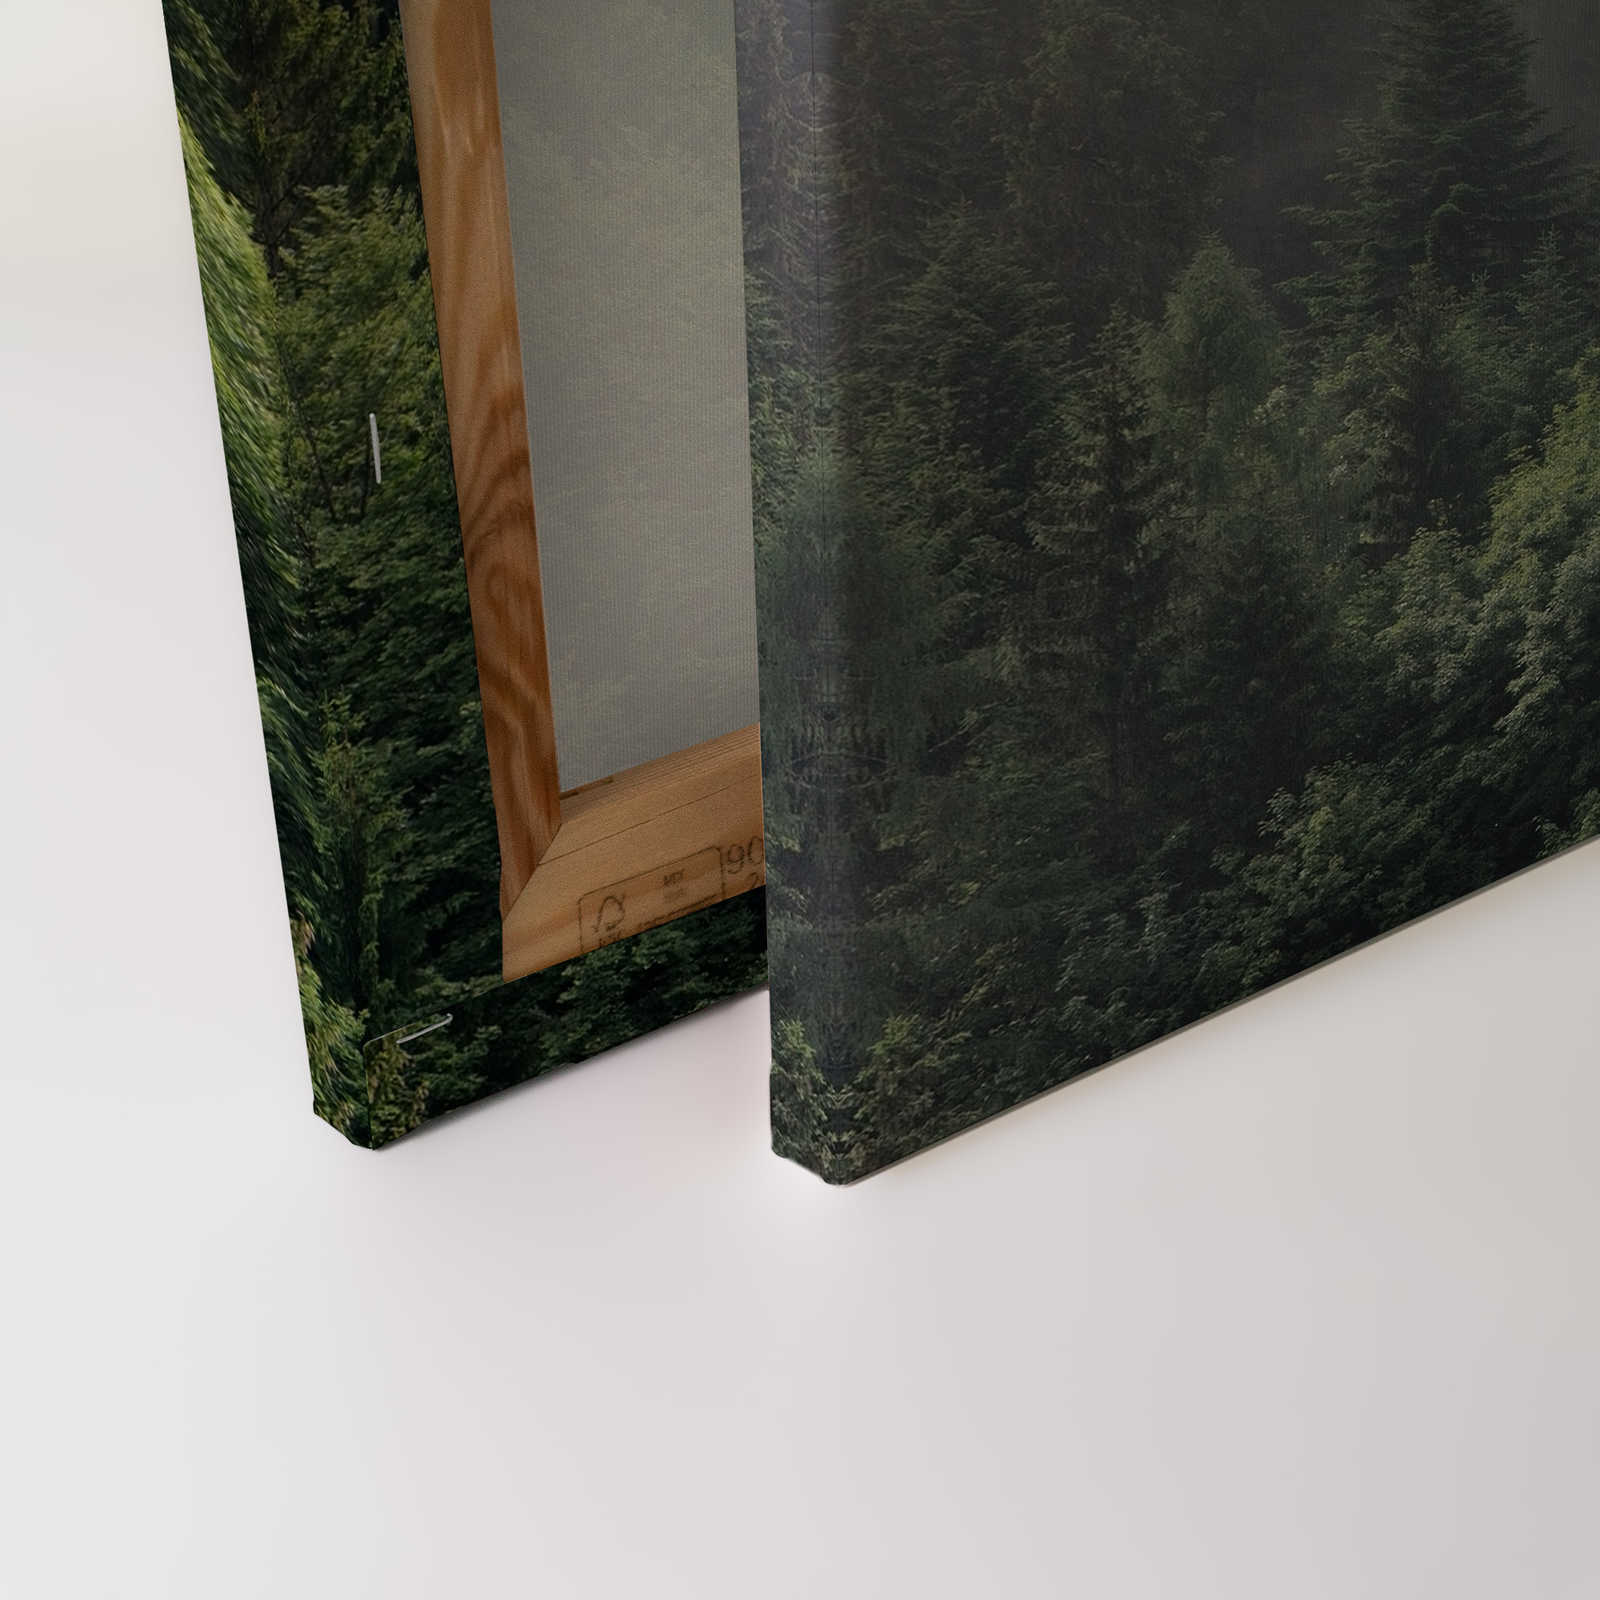             Canvas with forest from above on a foggy day - 0.90 m x 0.60 m
        